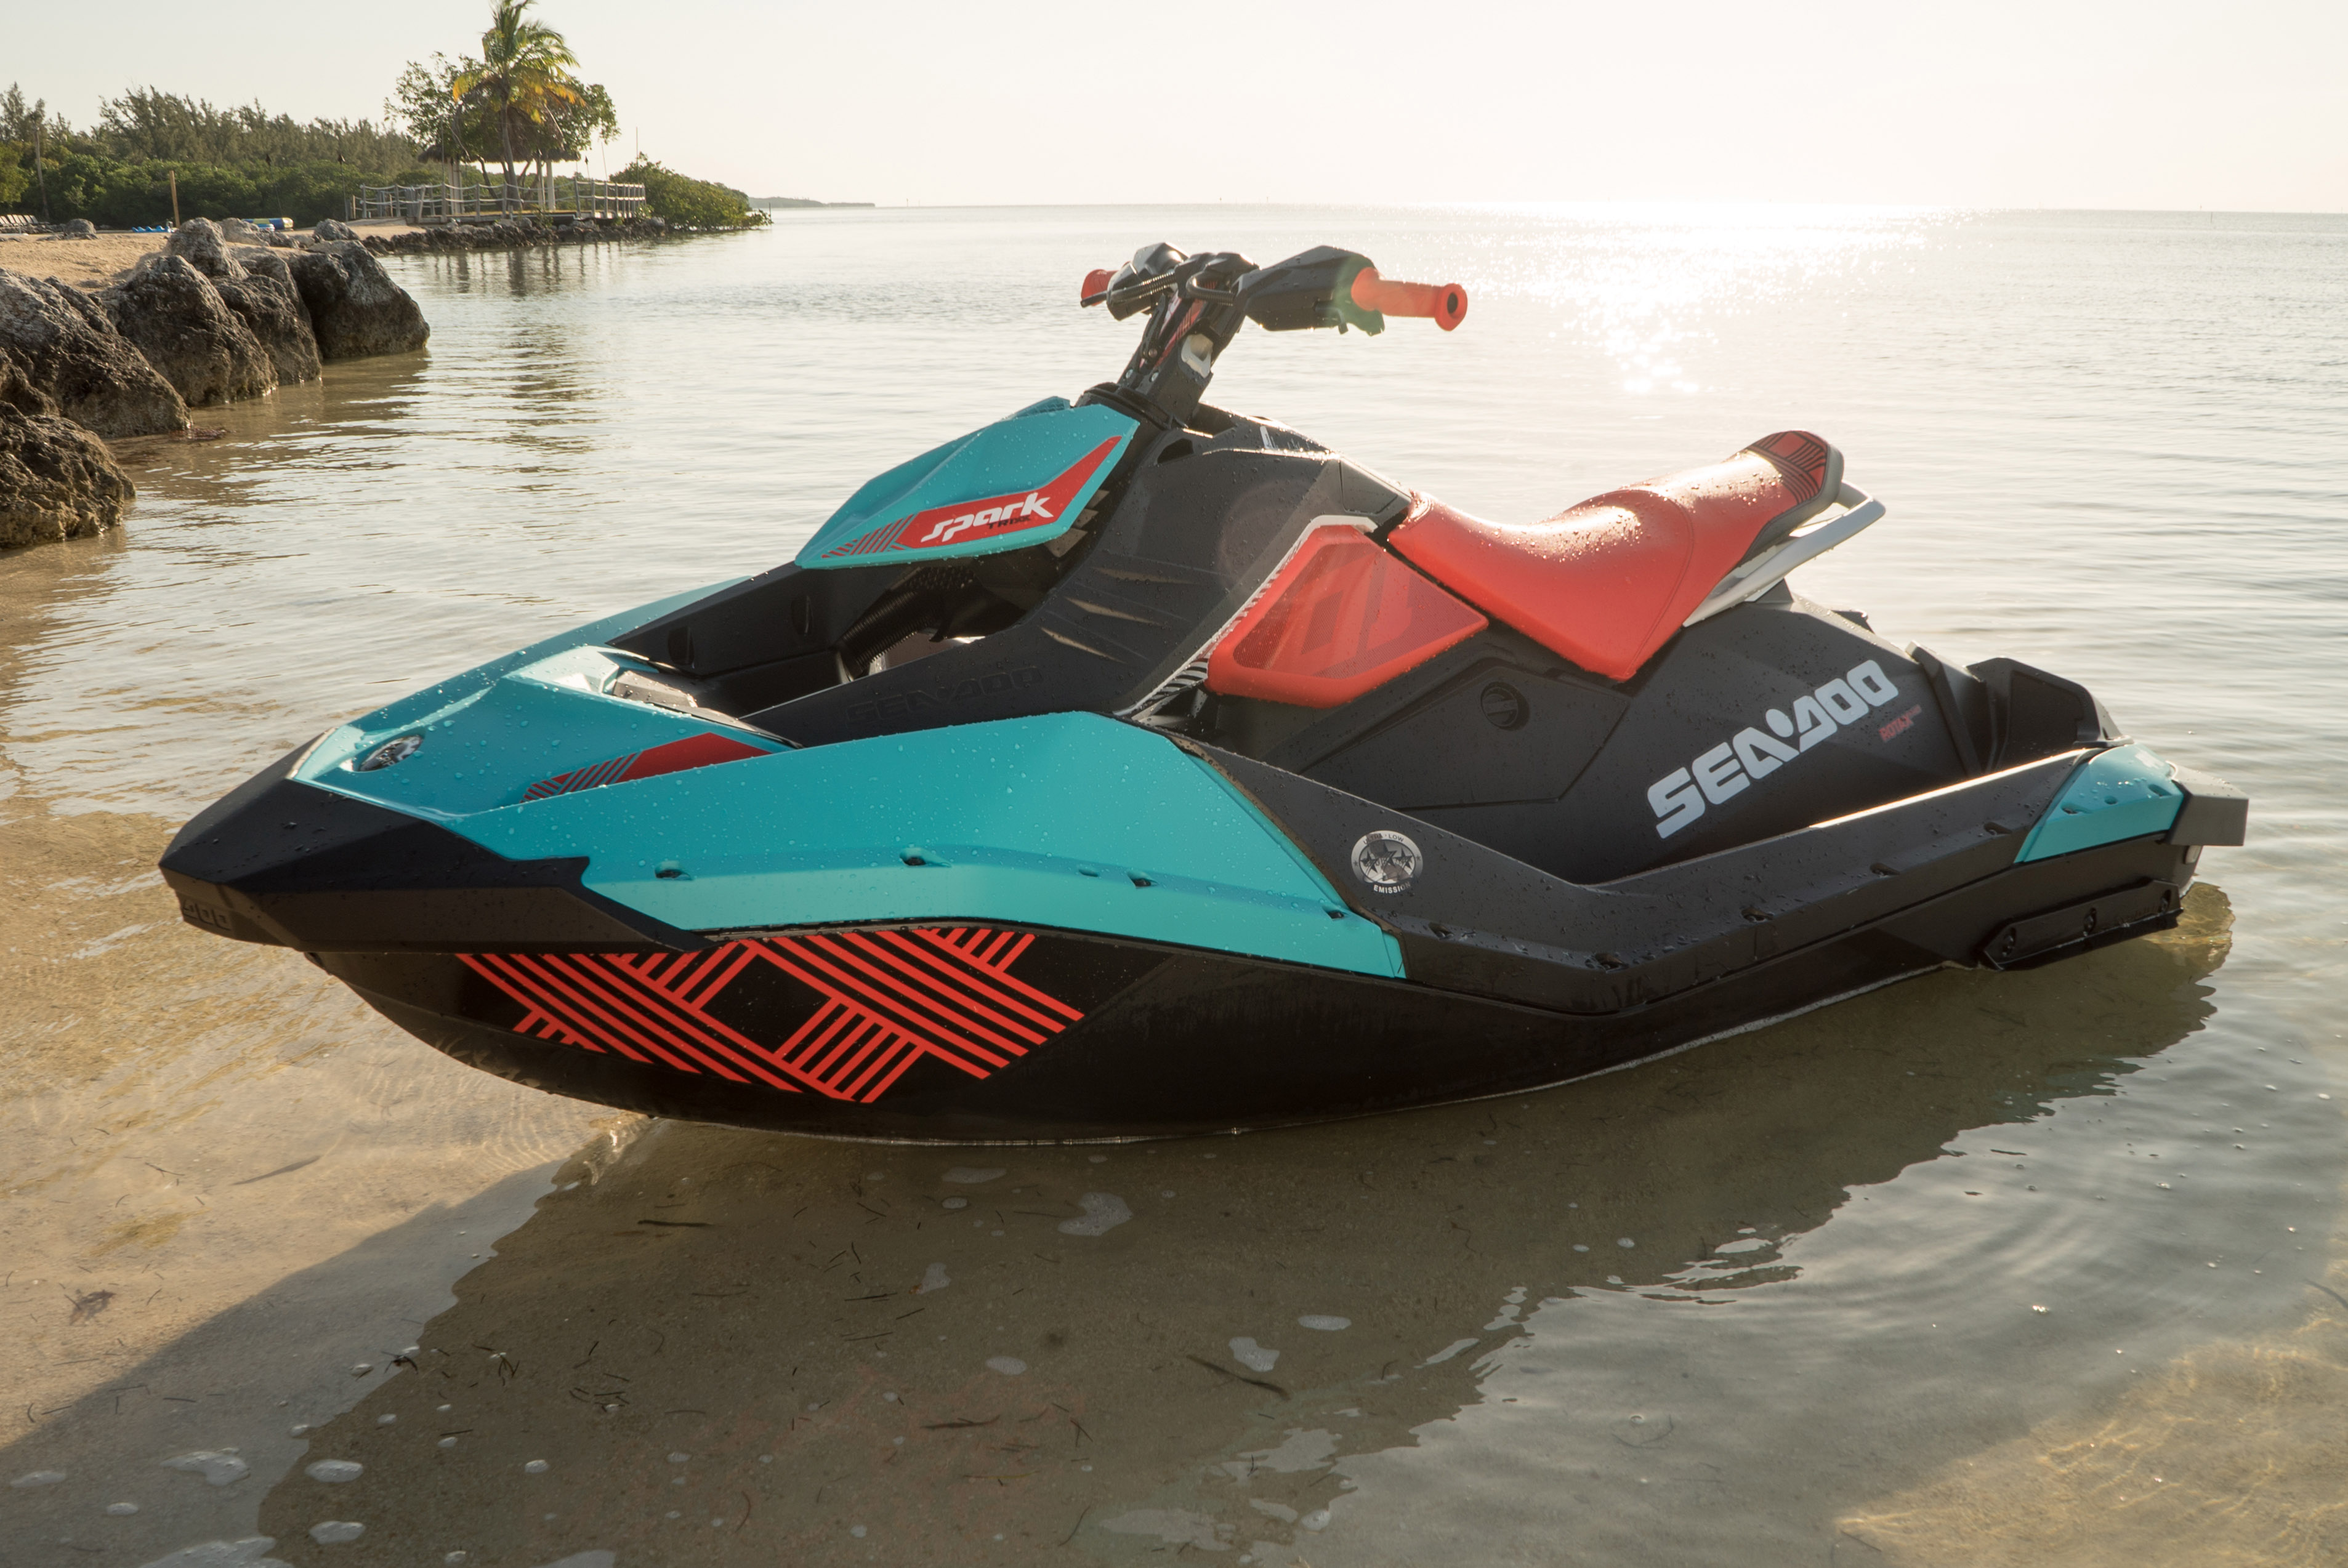 brp-introduces-2017-sea-doo-watercraft-models-boating-industry